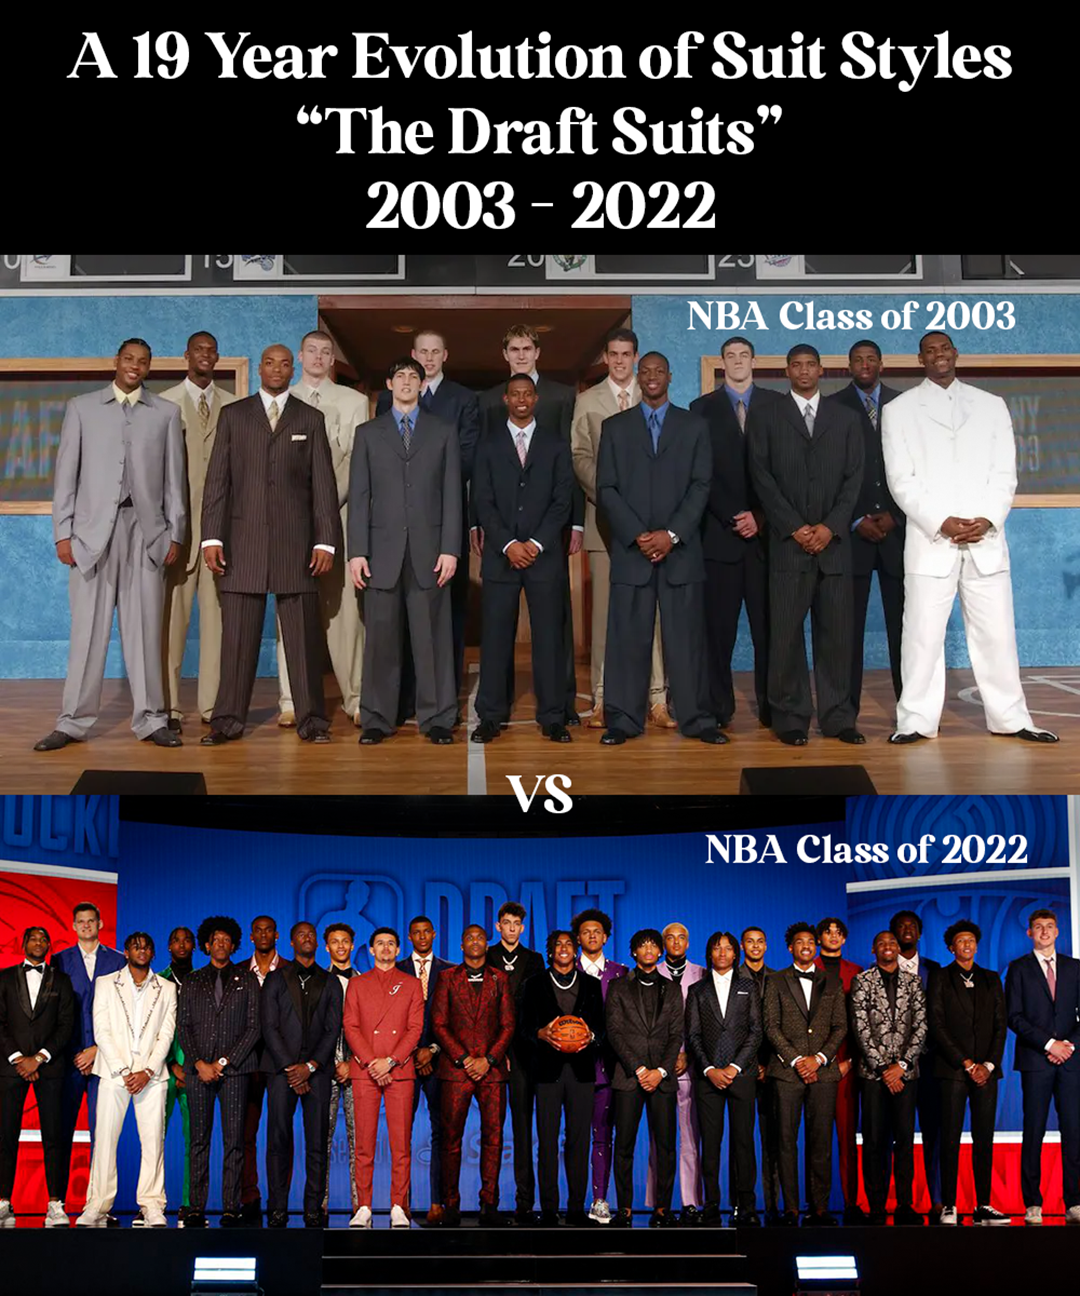 A 19 Year Evolution of NBA Suit Styles